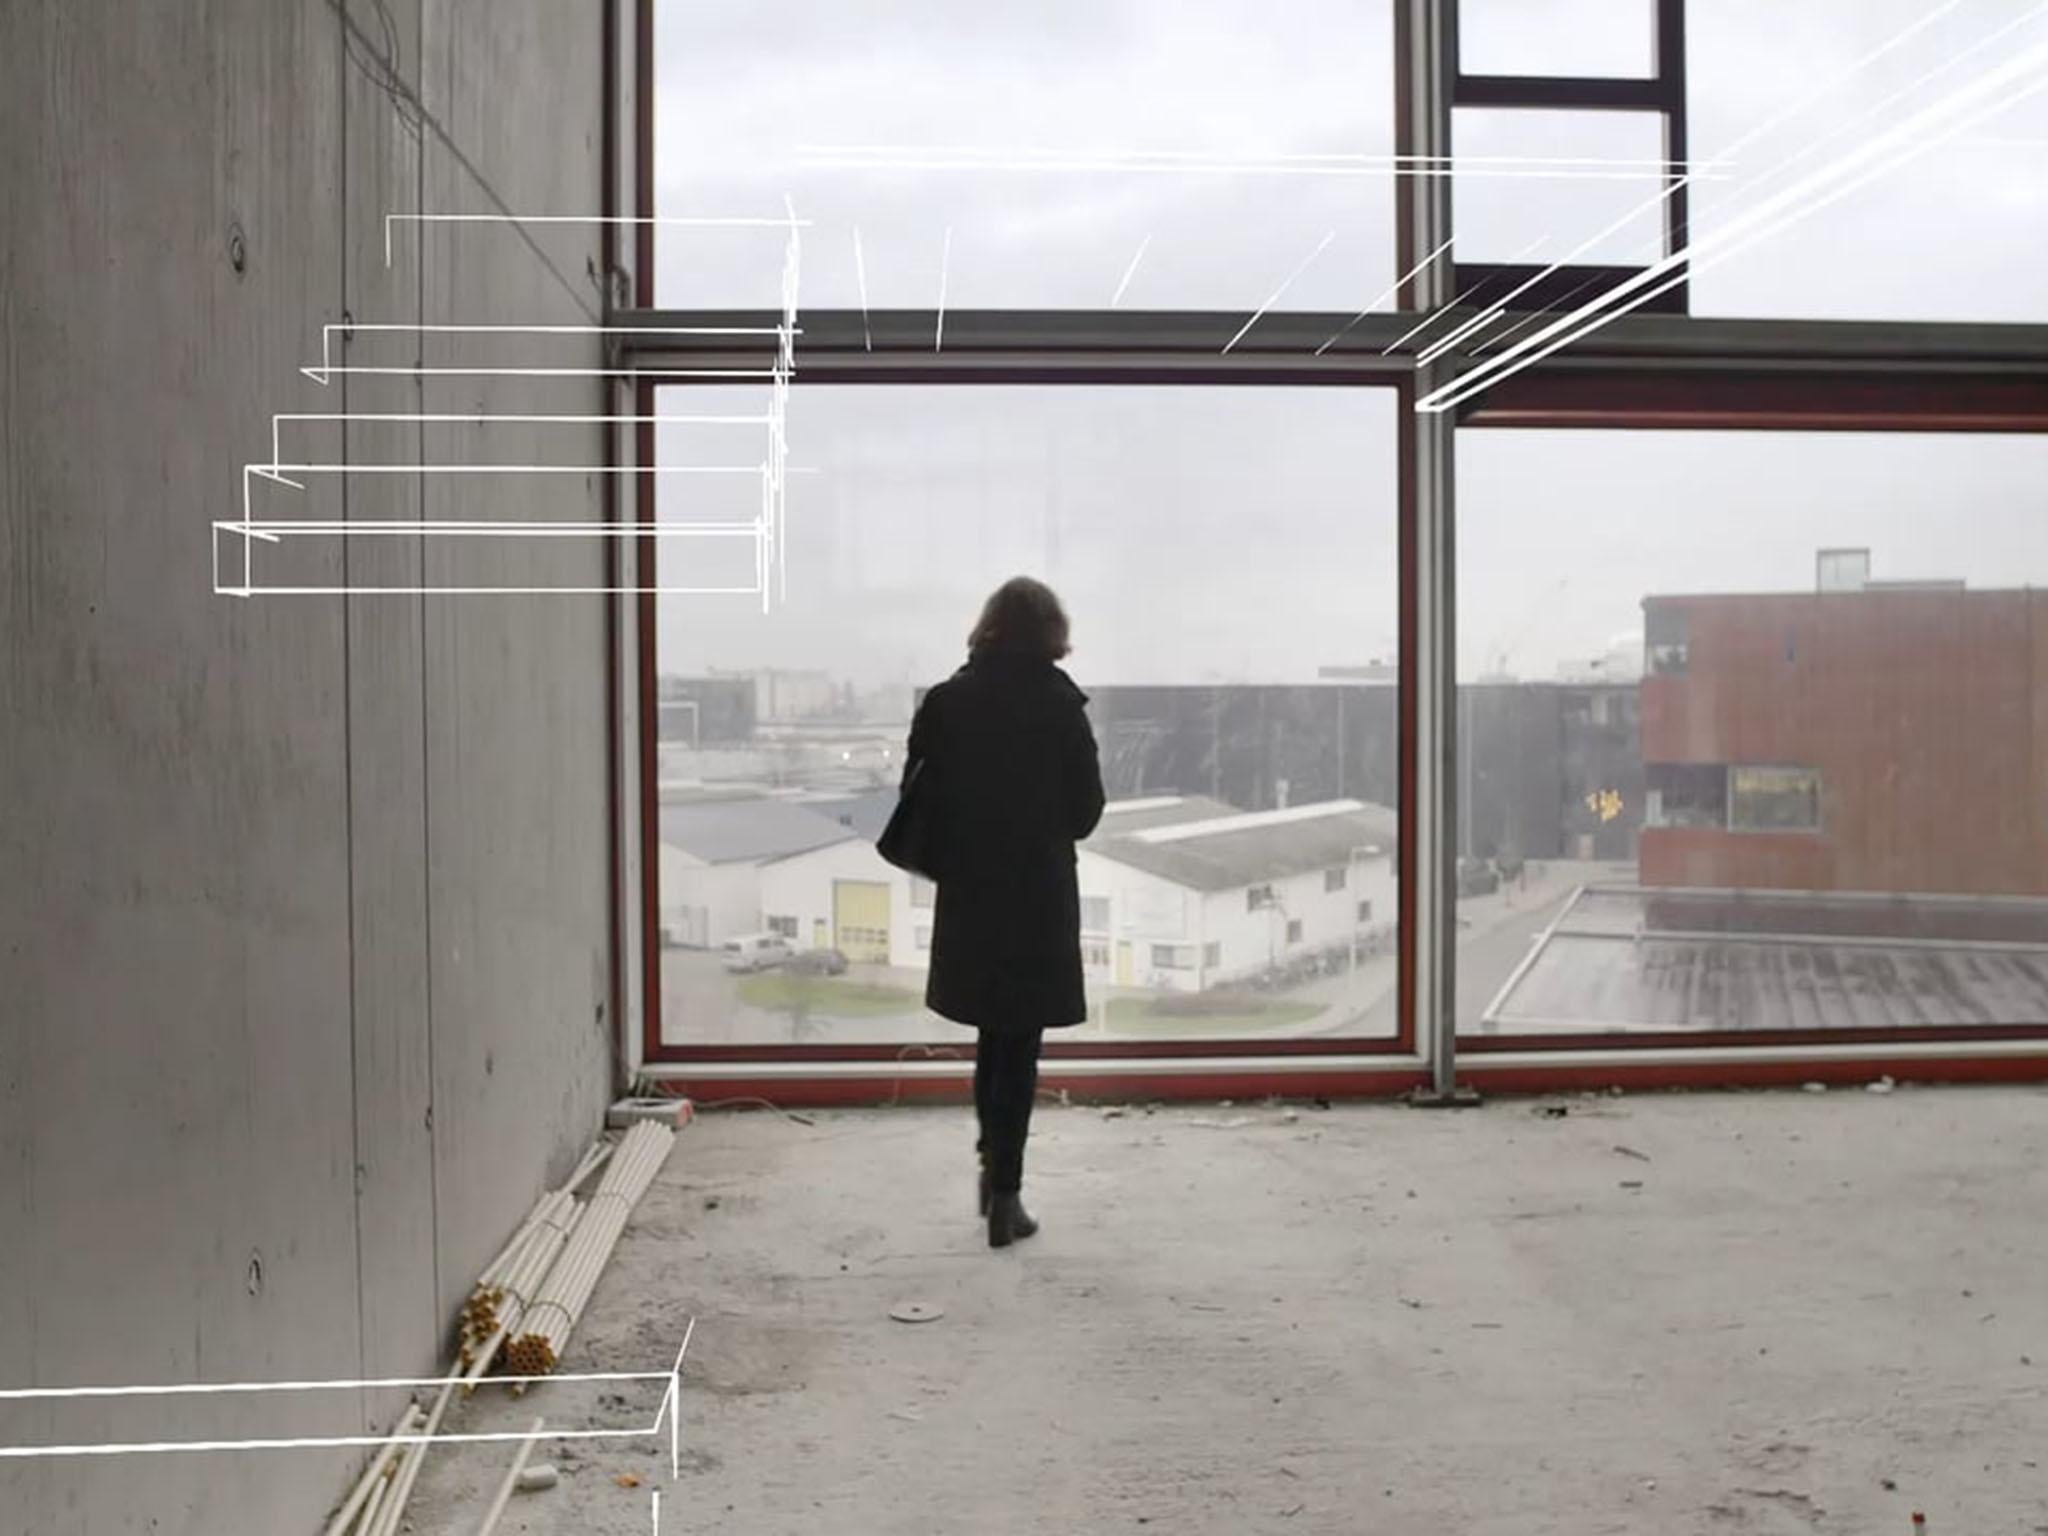 Promotional footage from Superlofts – a now award-winning concept from Mark Koehler Architects